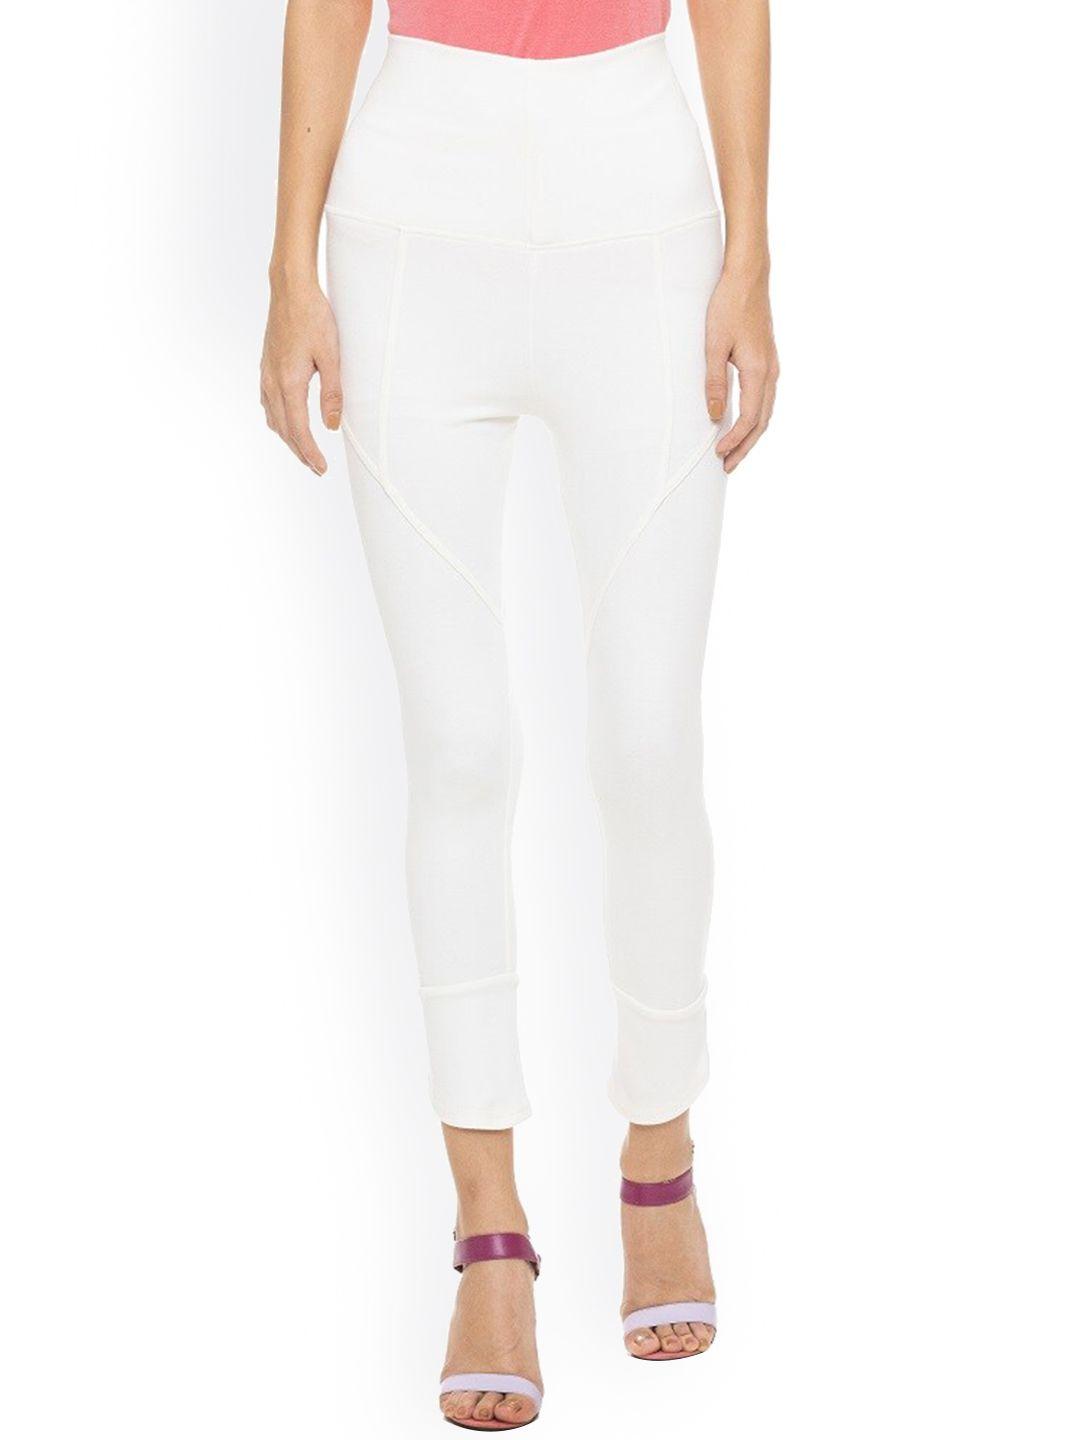 unmade off white calf length leggings with bottom detail